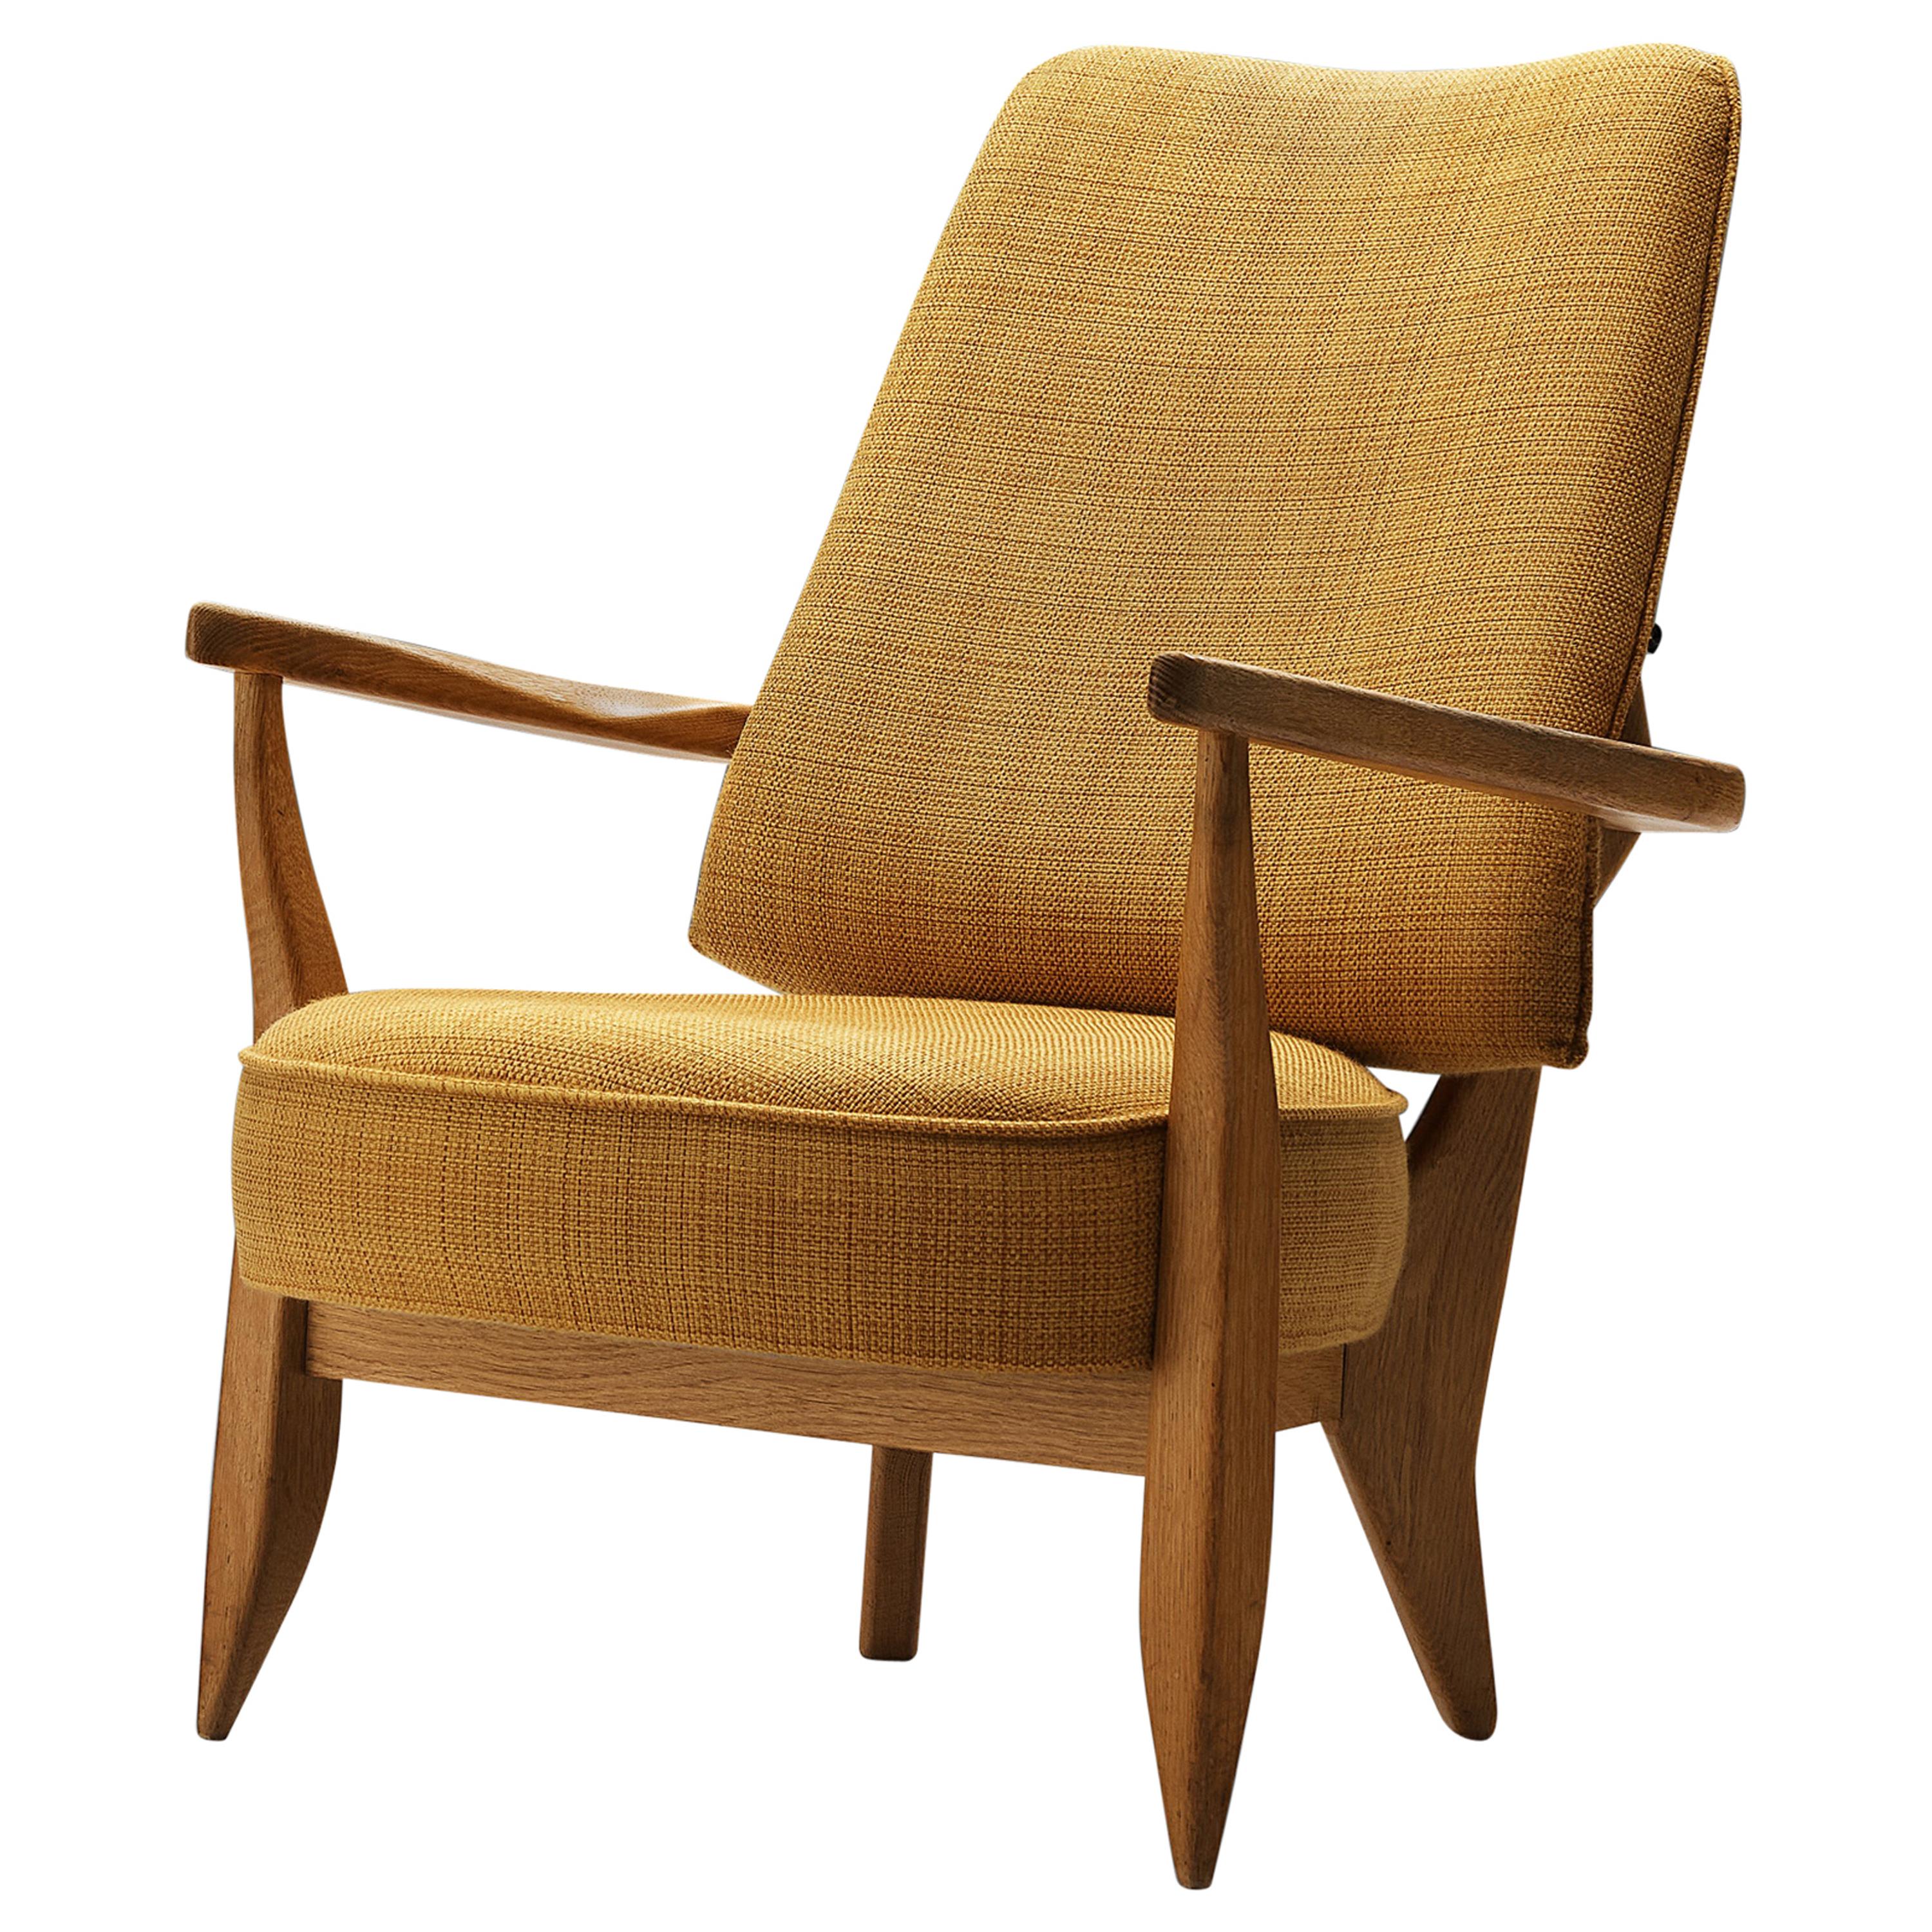 Guillerme & Chambron Lounge Chair in Oak with Yellow Upholstery